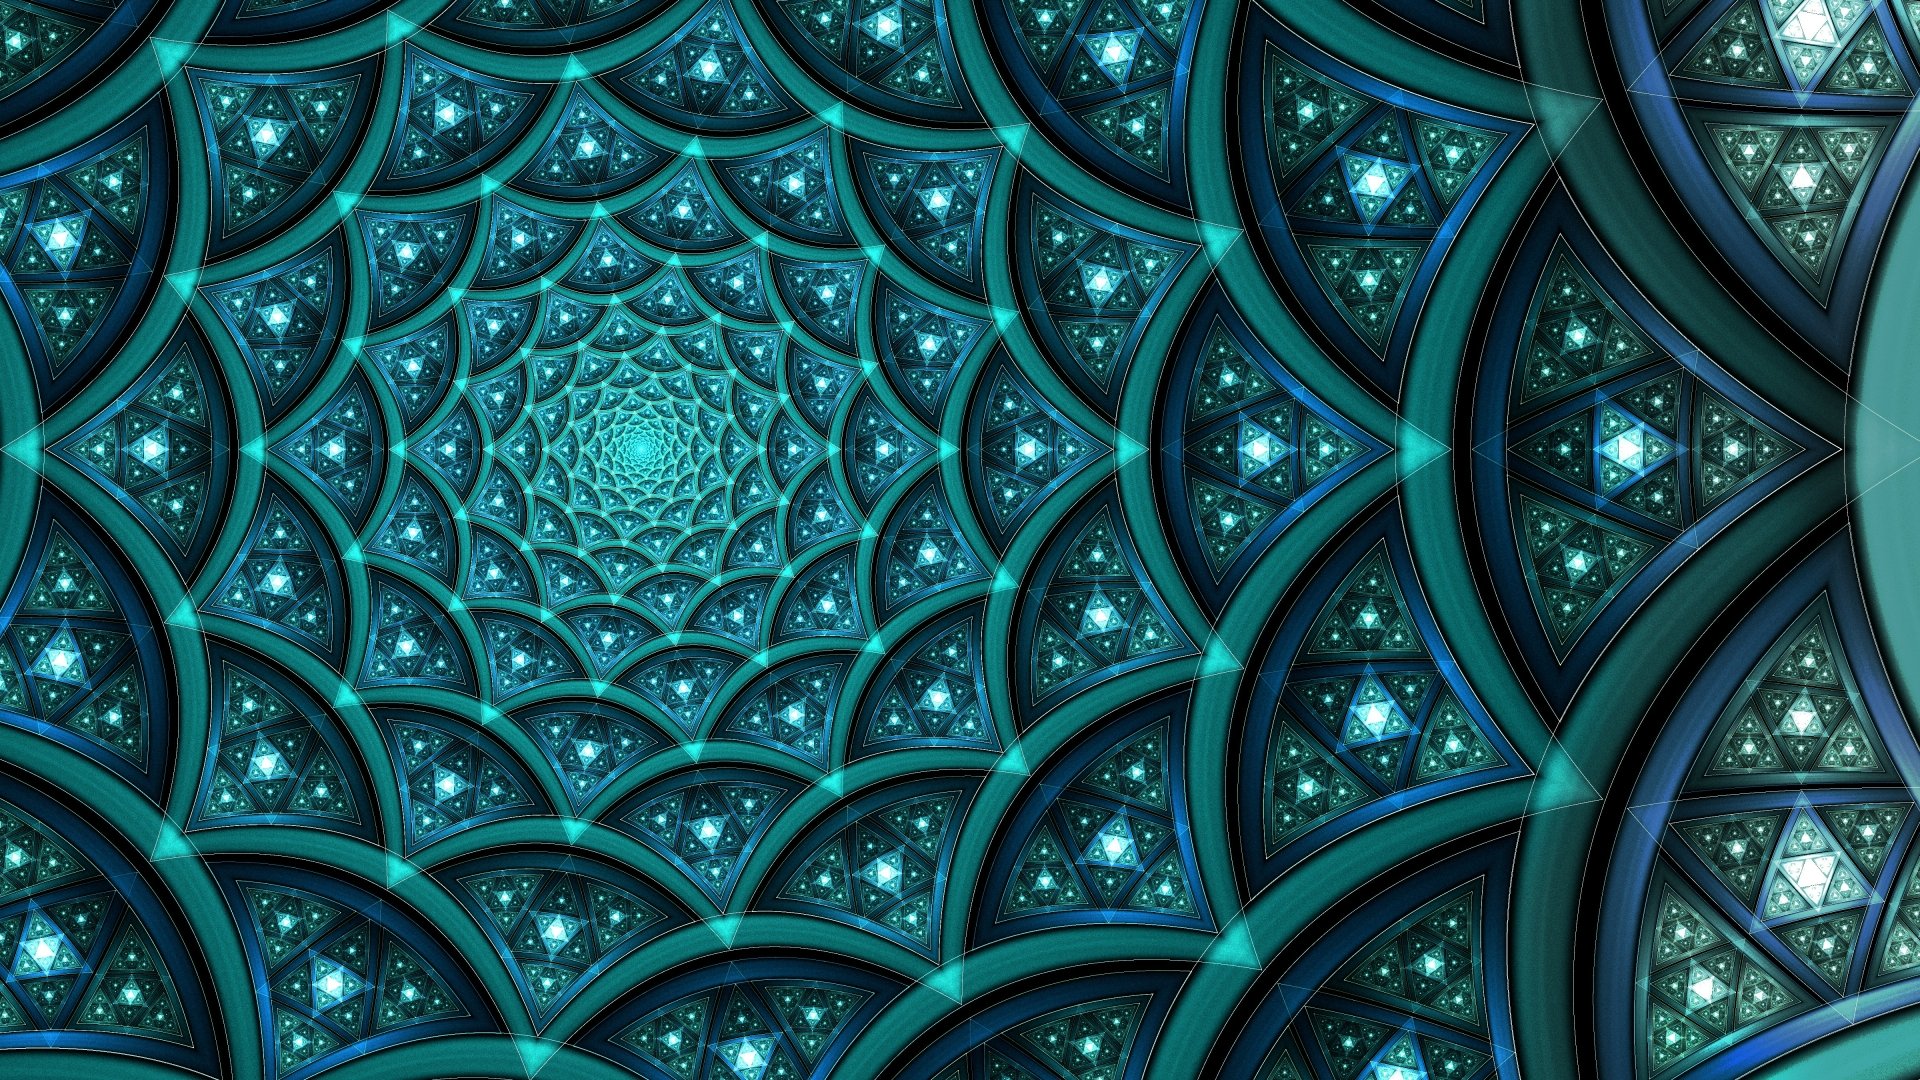 Download Pattern Psychedelic Trippy Blue Turquoise Abstract Fractal  4k Ultra HD Wallpaper by Jean-Philippe Talma